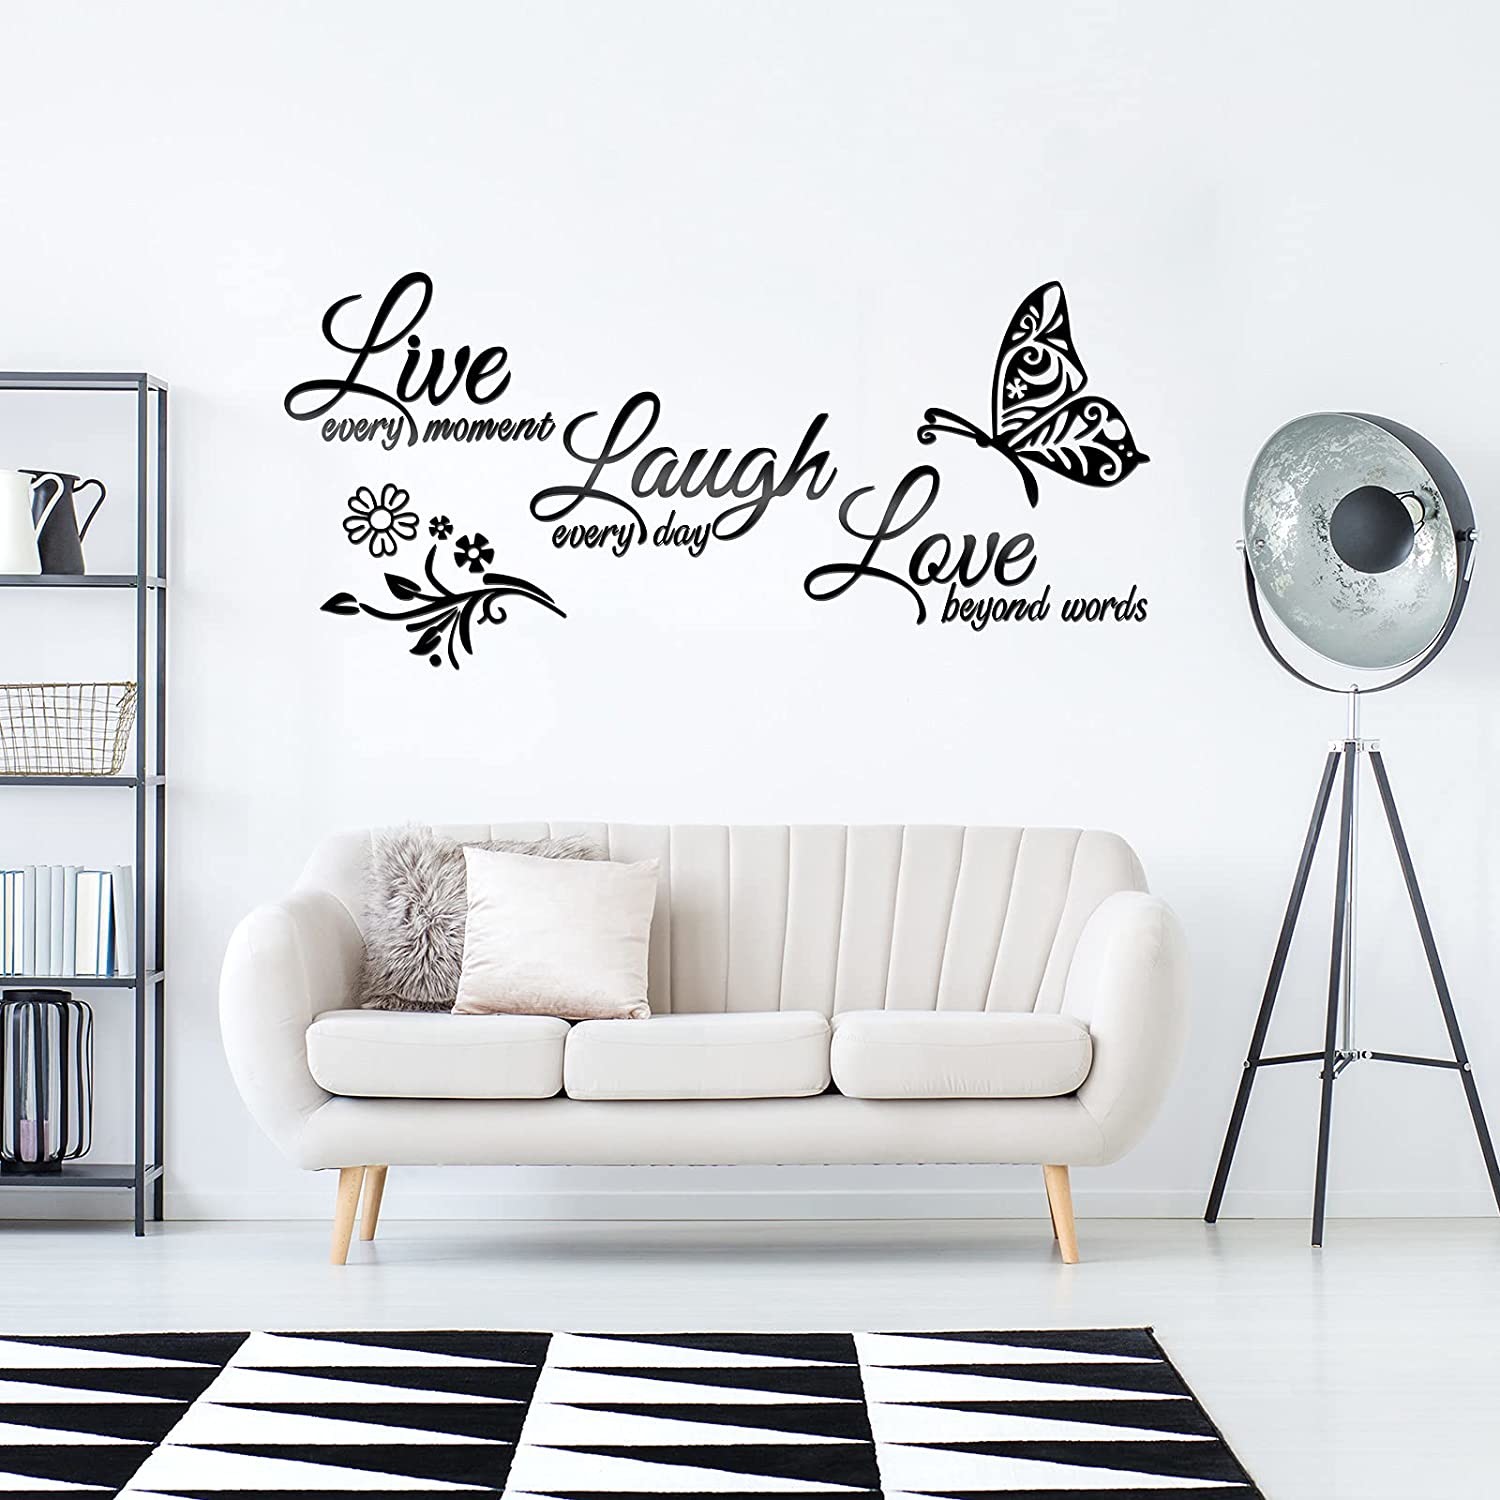  65.00x28.70cm Acrylic Mirror Wall With Text / Decal Art Family Stickers Manufactures